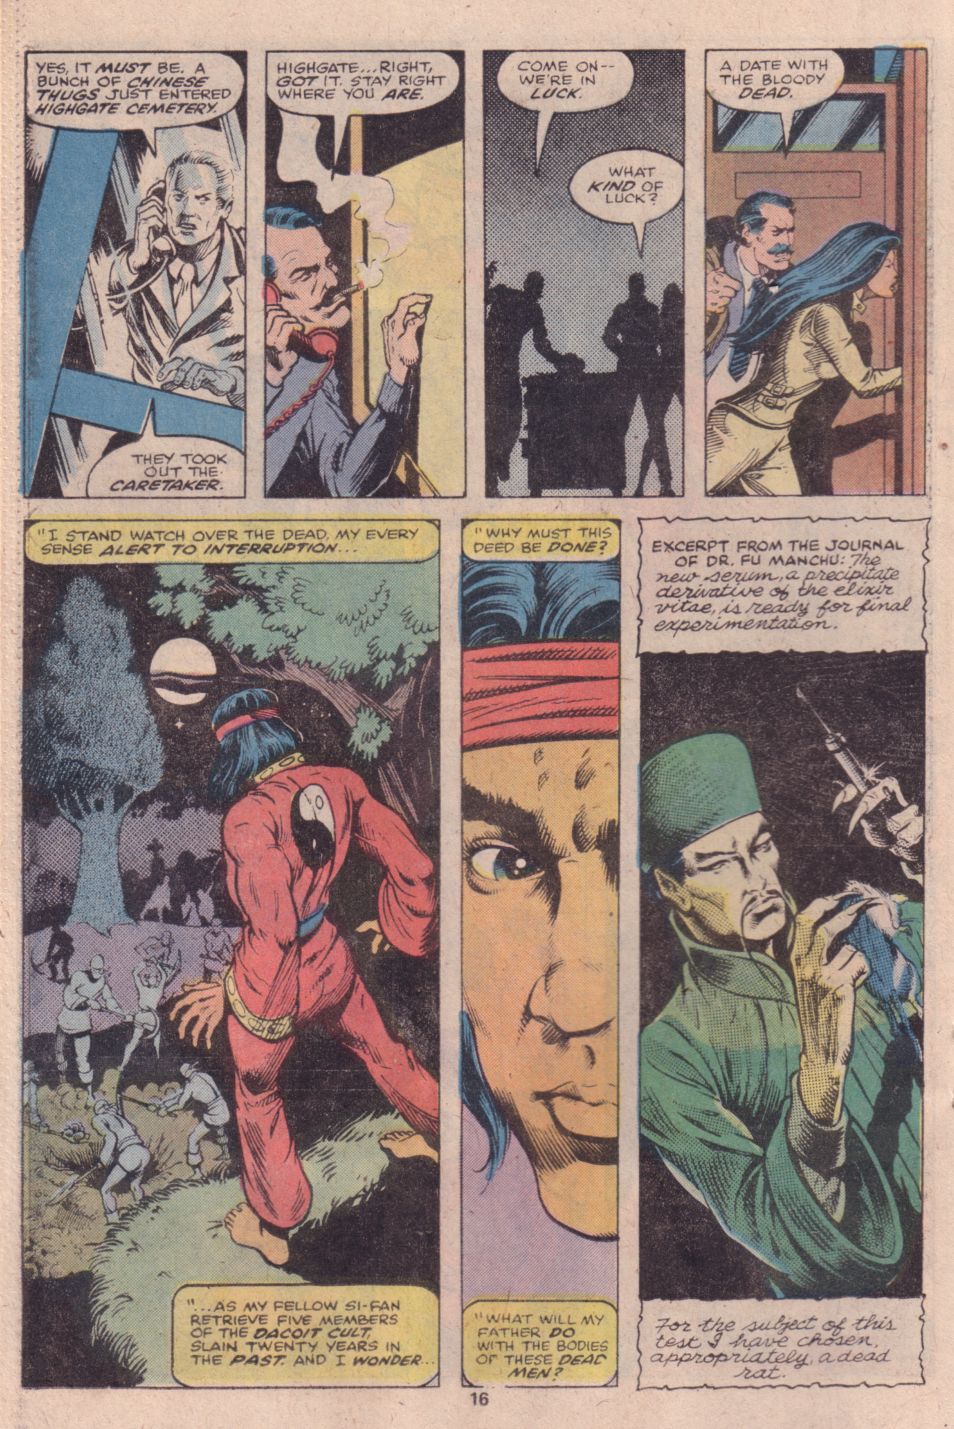 What If? (1977) issue 16 - Shang Chi Master of Kung Fu fought on The side of Fu Manchu - Page 13